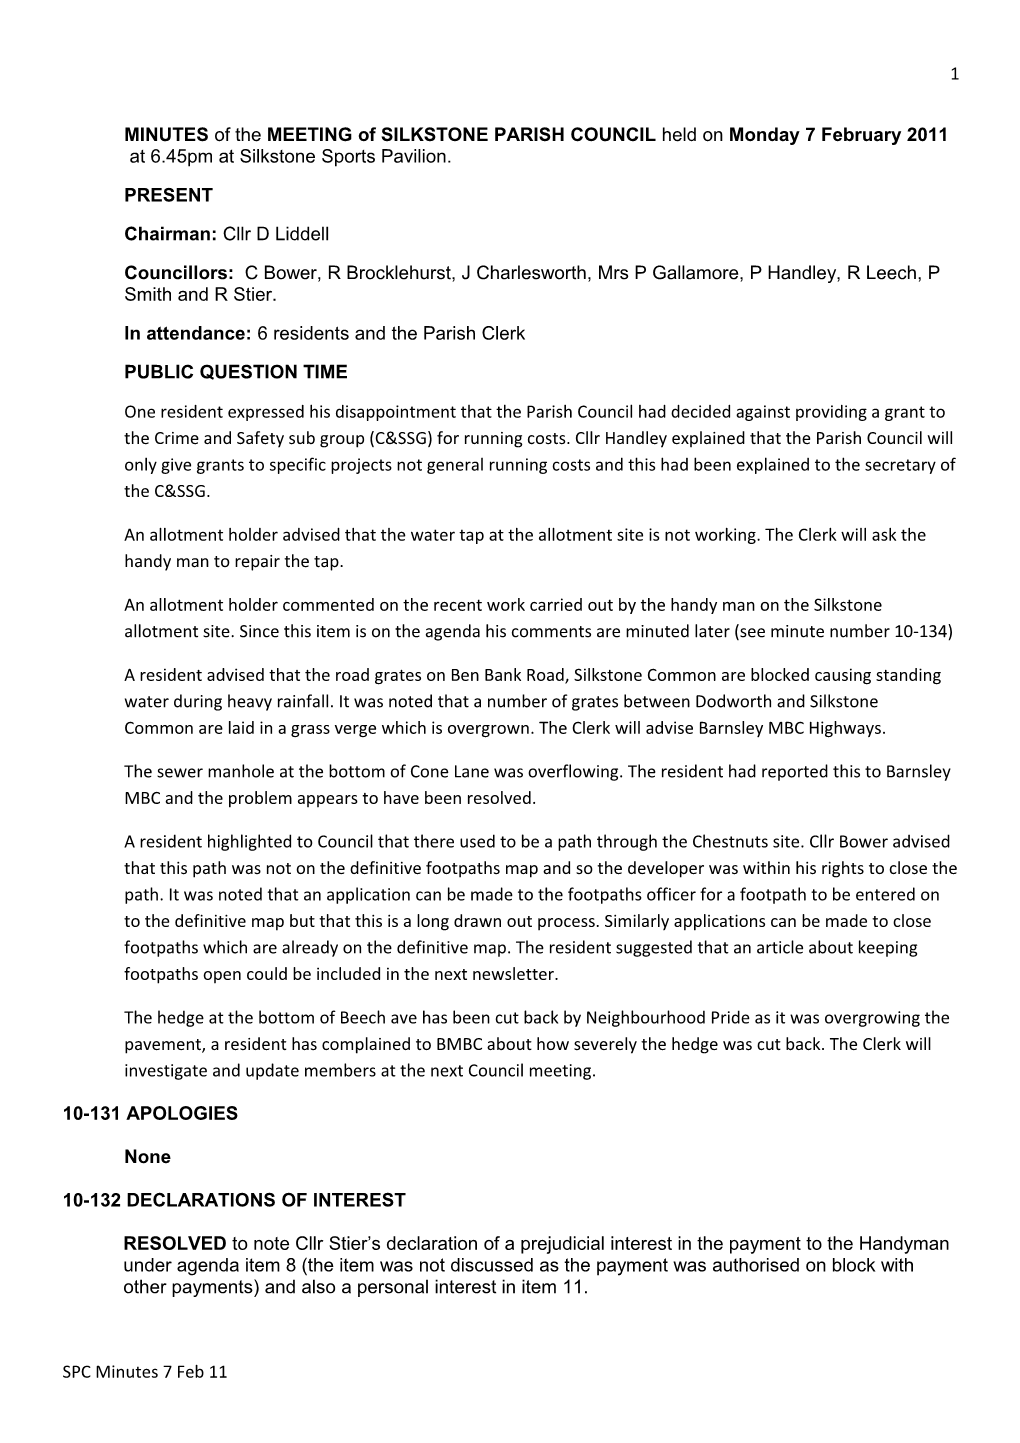 MINUTES of Themeeting of SILKSTONE PARISH COUNCIL Held on Monday 7 February 2011 at 6.45Pm